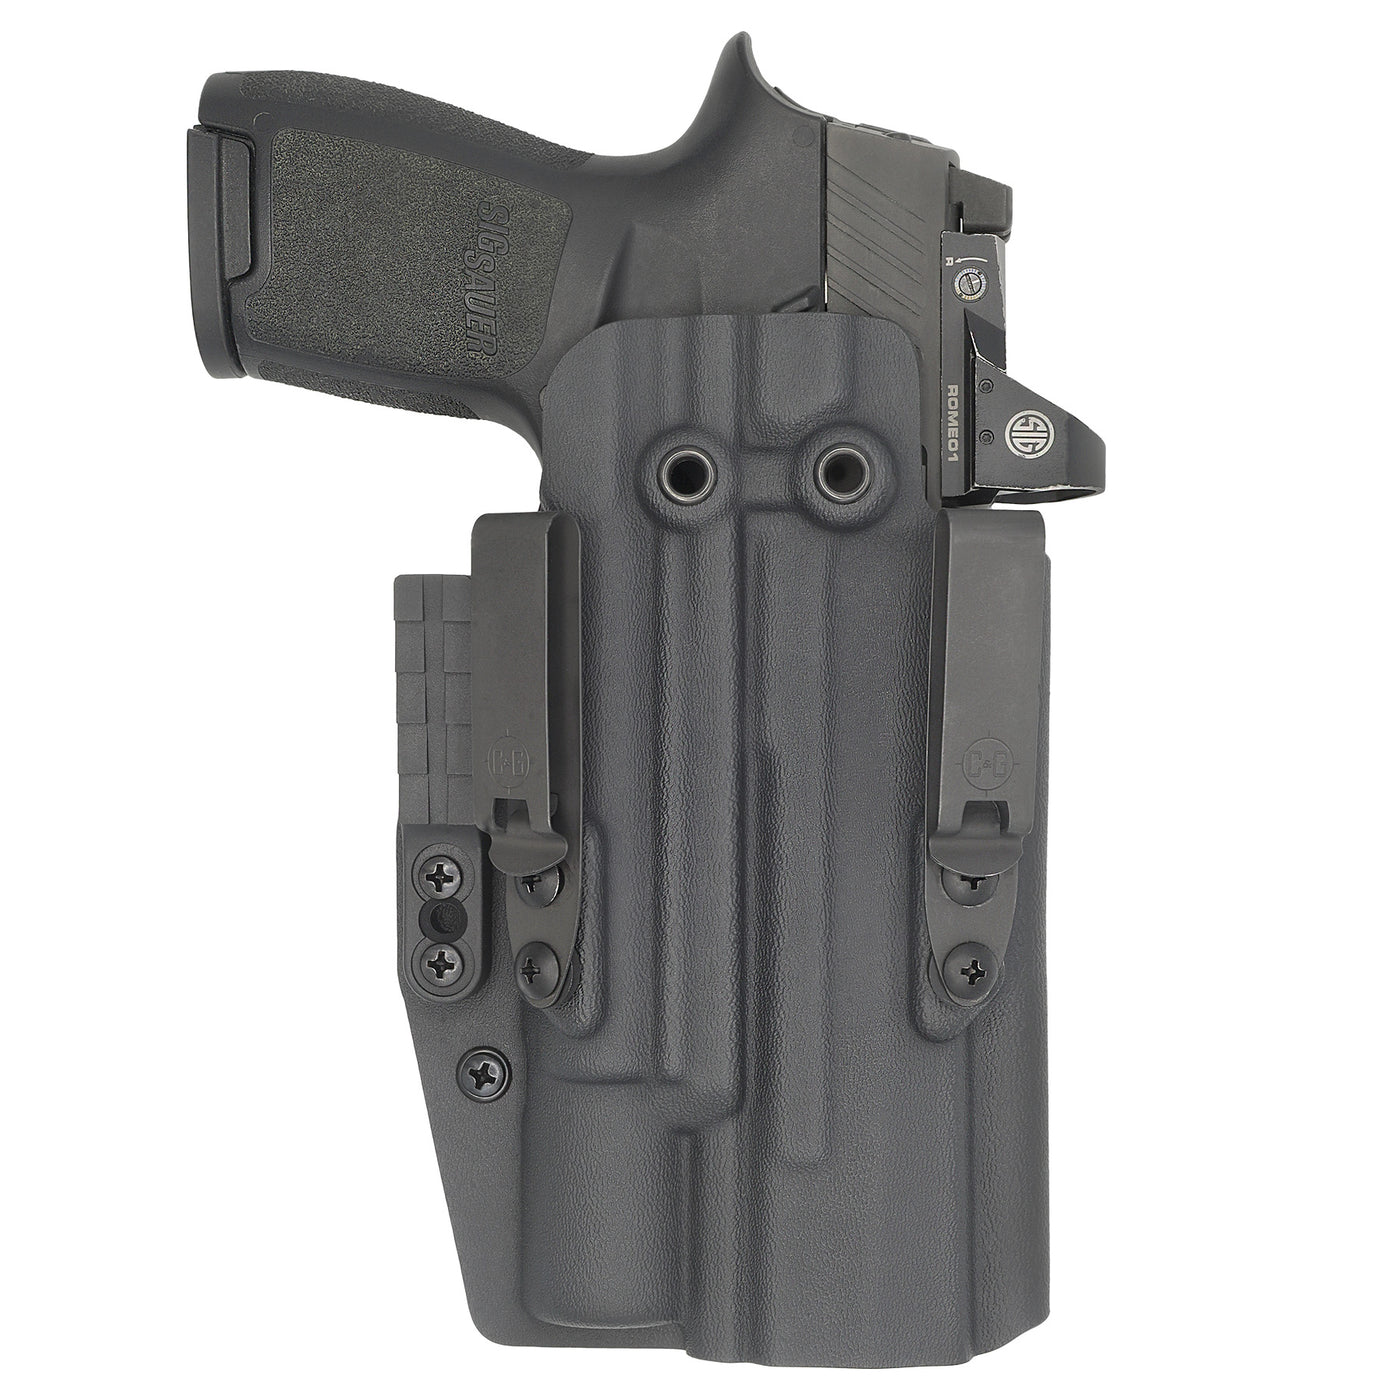 C&G Holsters custom IWB ALPHA UPGRADE Tactical XDM Elite Surefire X300 in holstered position